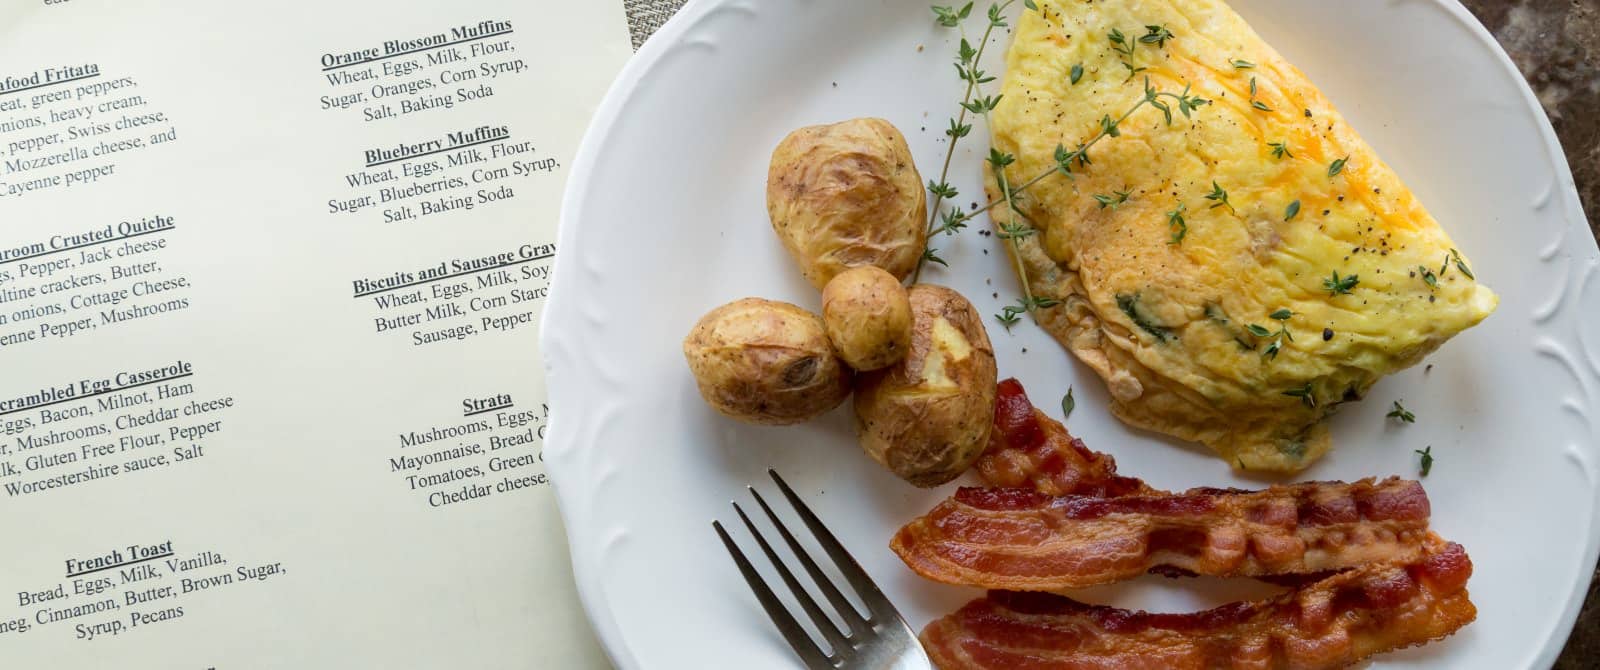 Close up view of breakfast menu and white plate with omelette, bacon, and potatoes